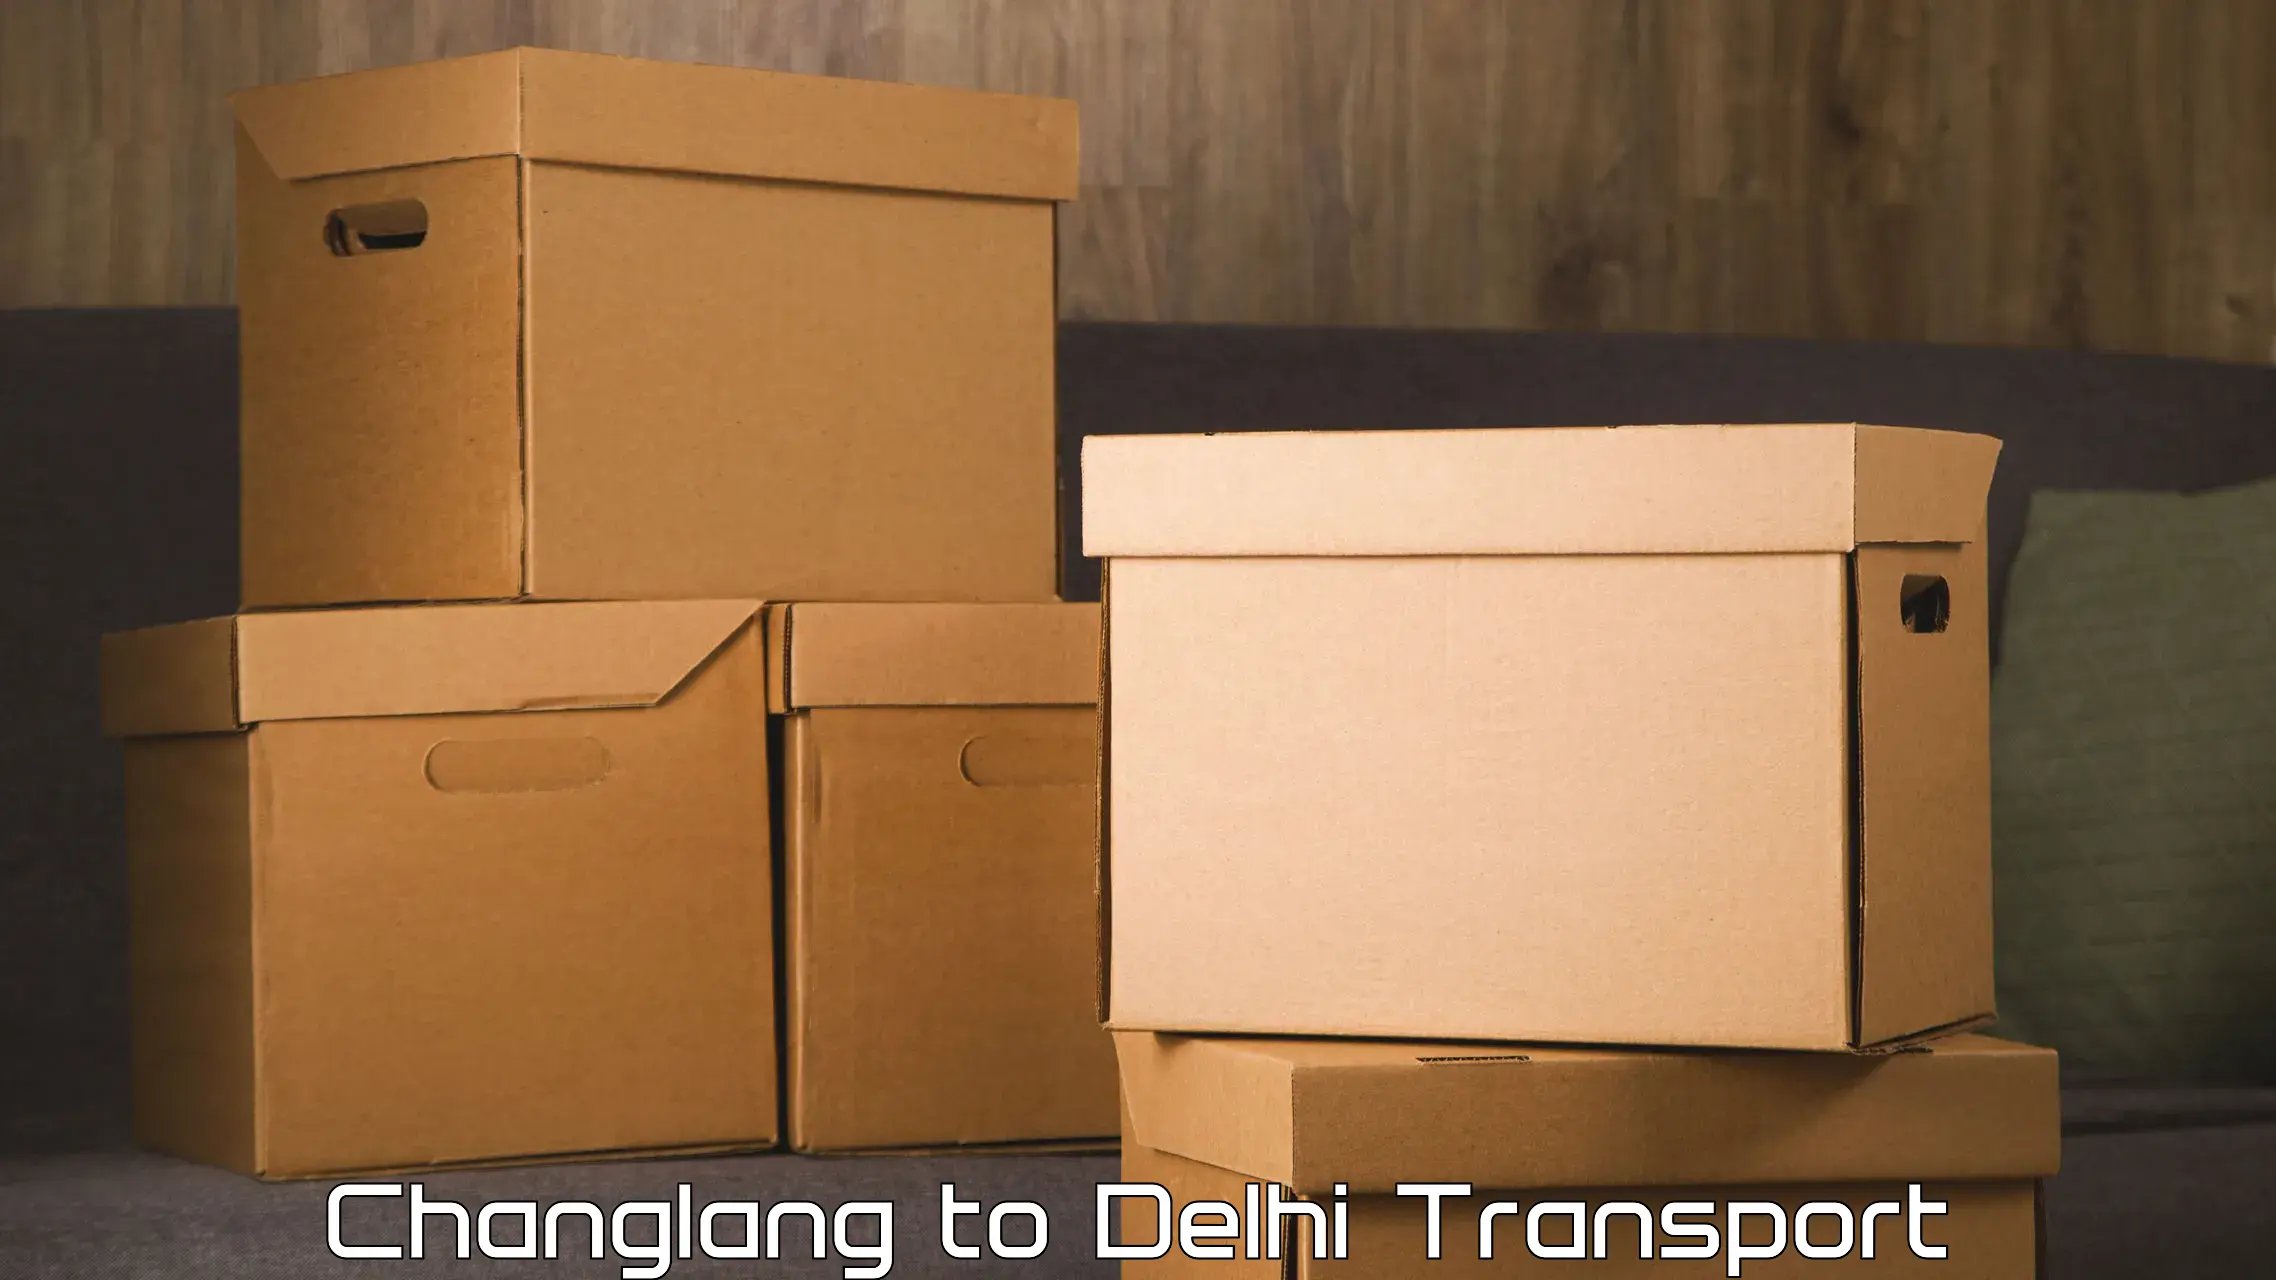 Cycle transportation service Changlang to University of Delhi